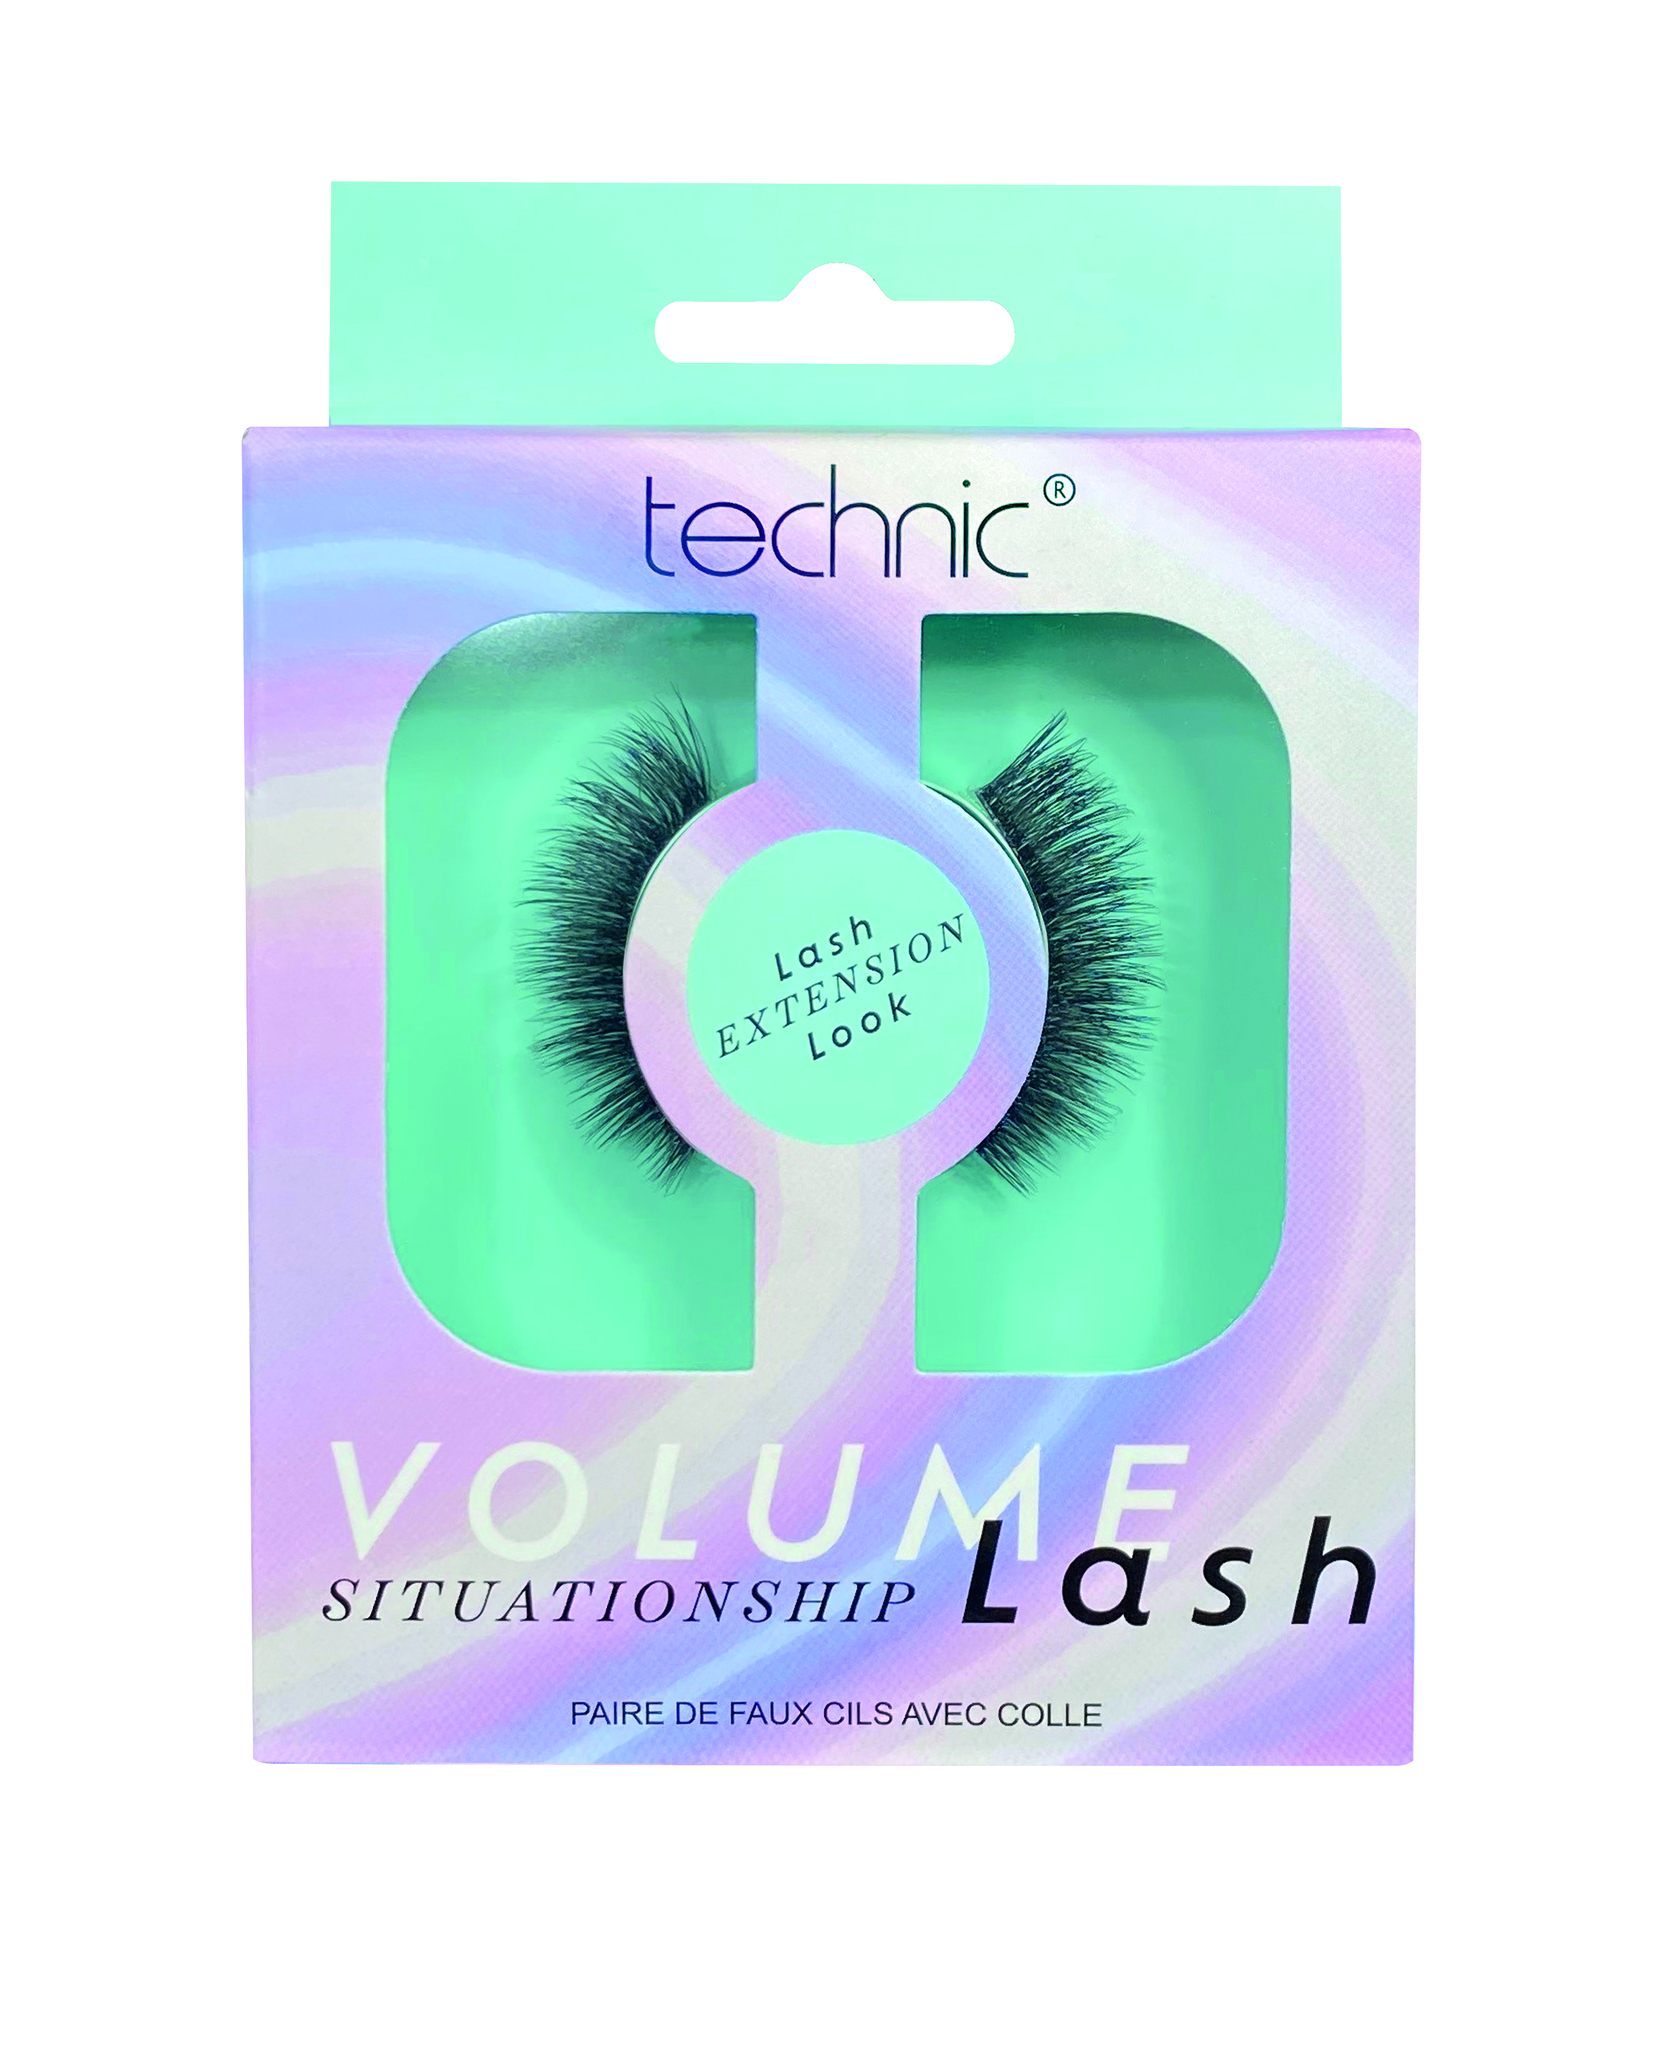 TECHNIC Volume Lash Extension Look - Situationship